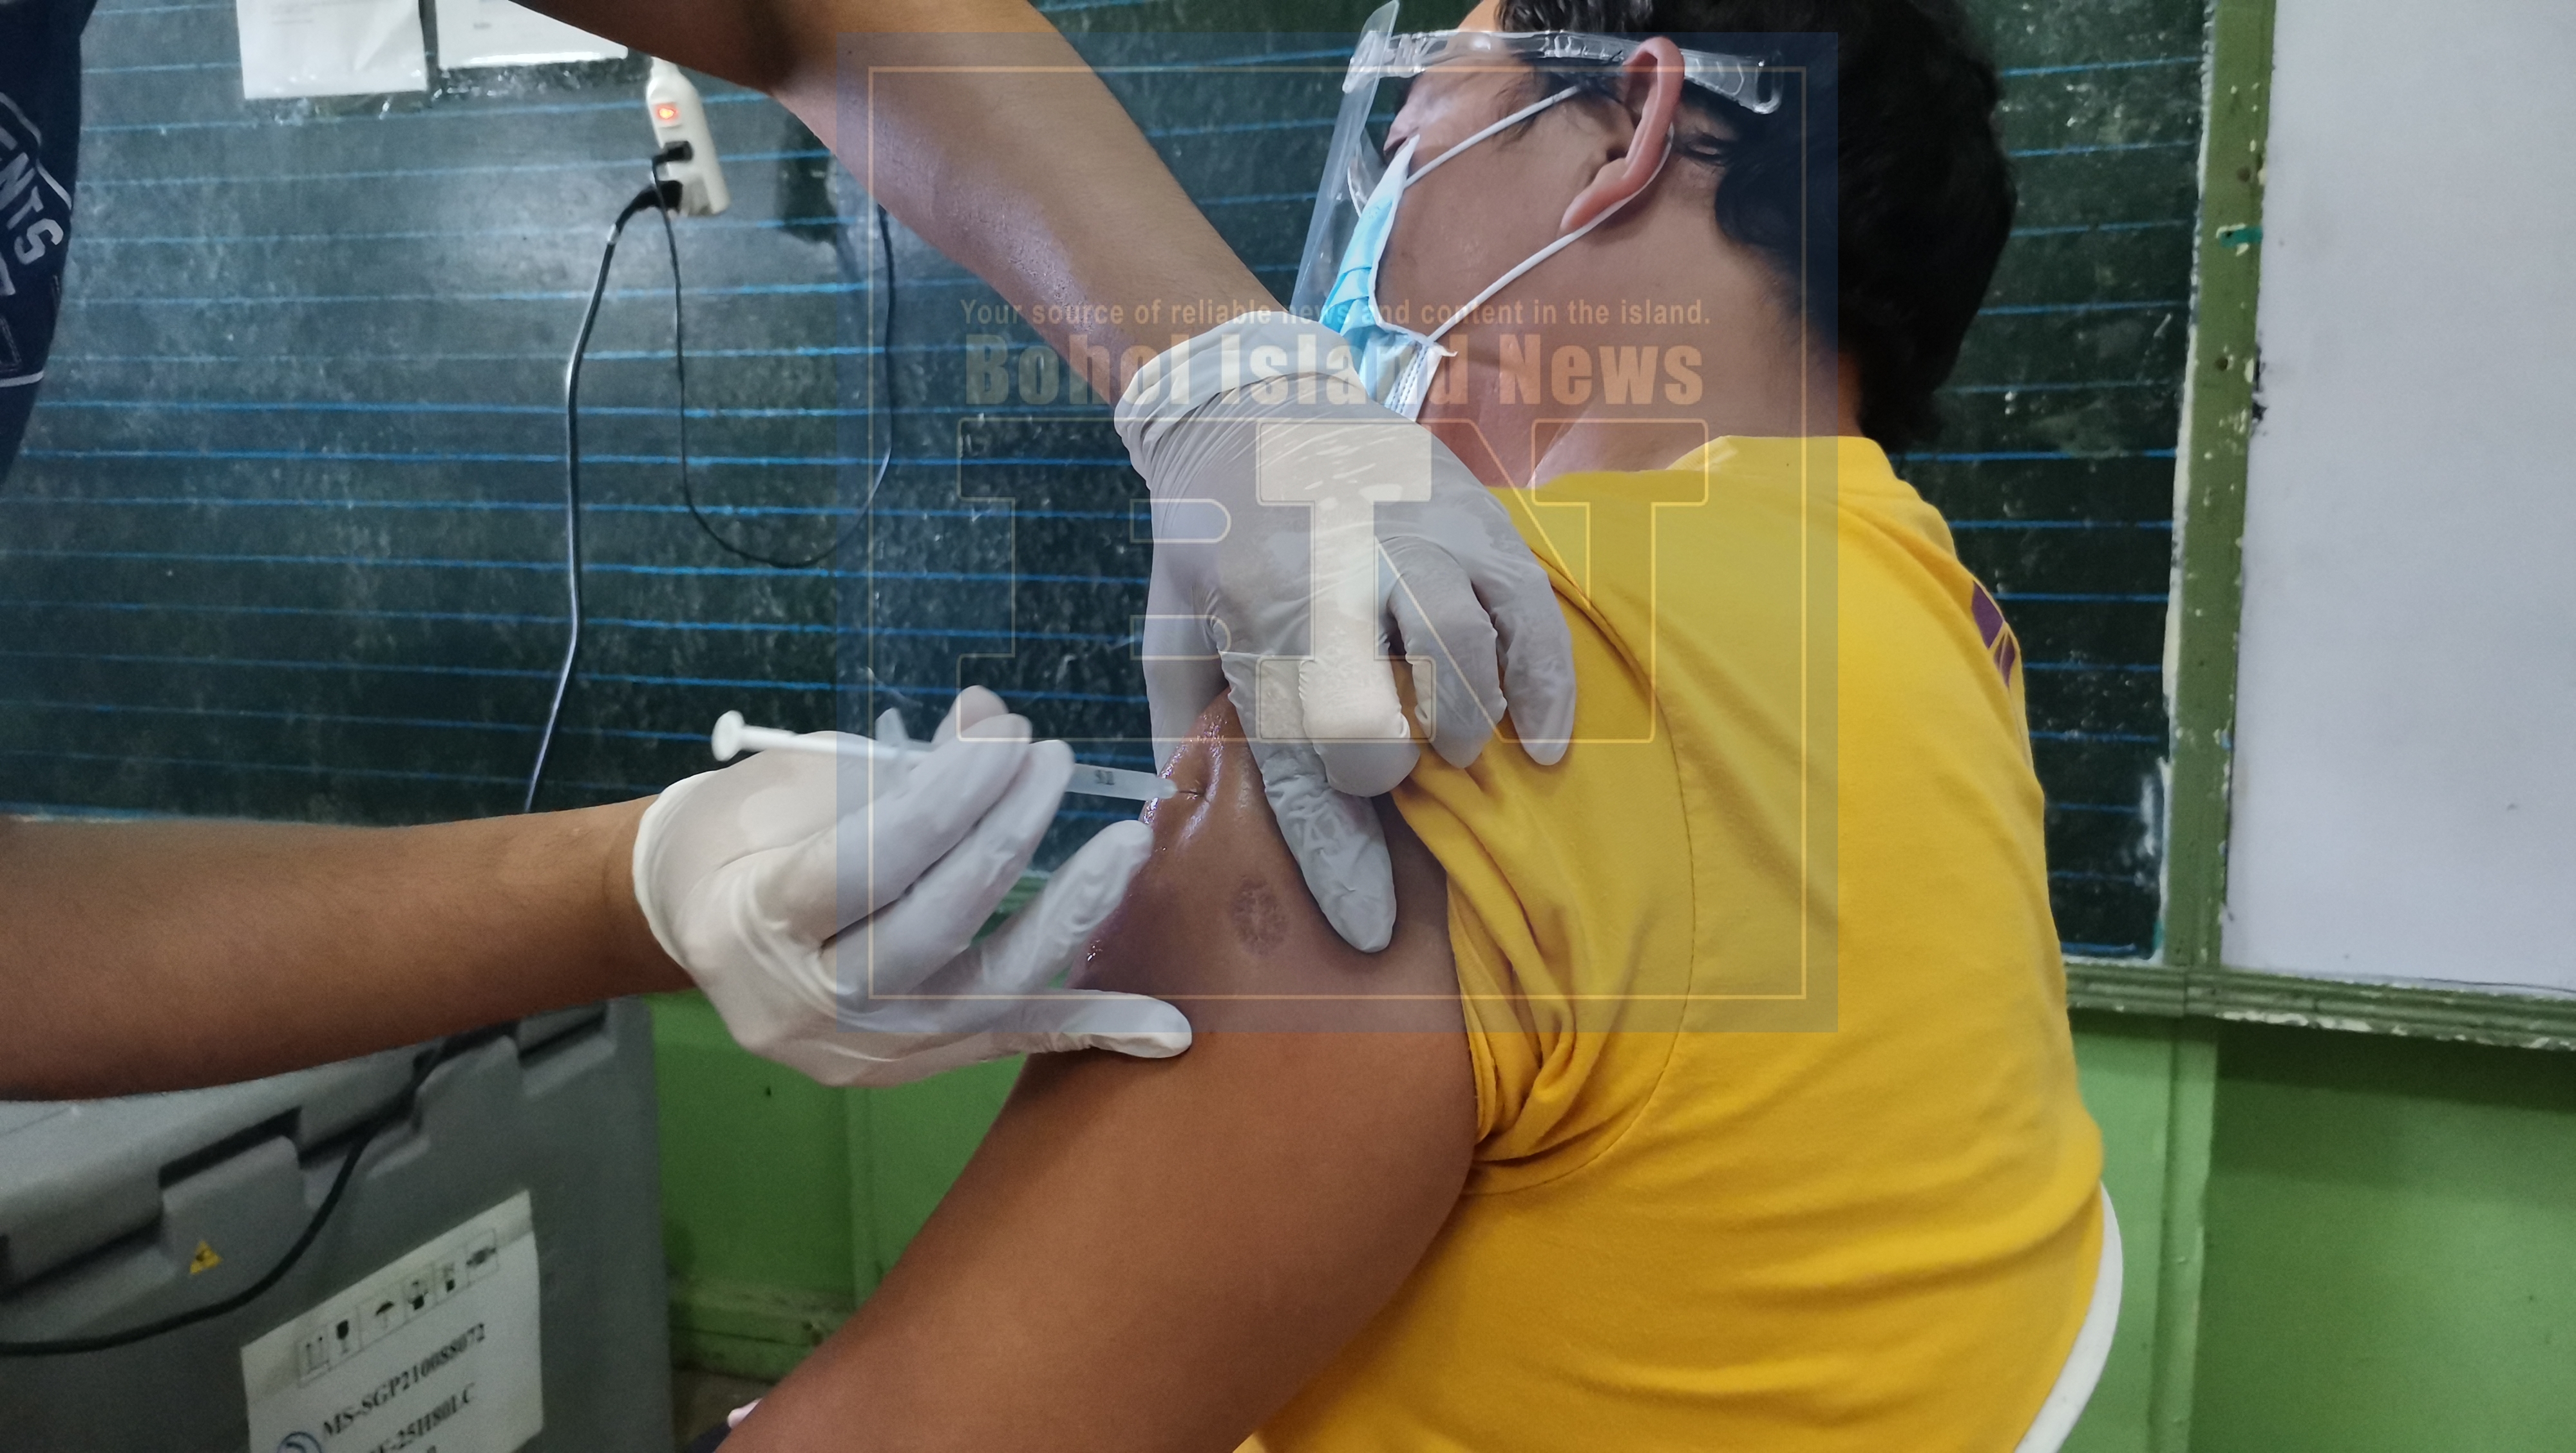 Simul vaccination for Bohol Day Bakuna Day with 50K J & J jabs